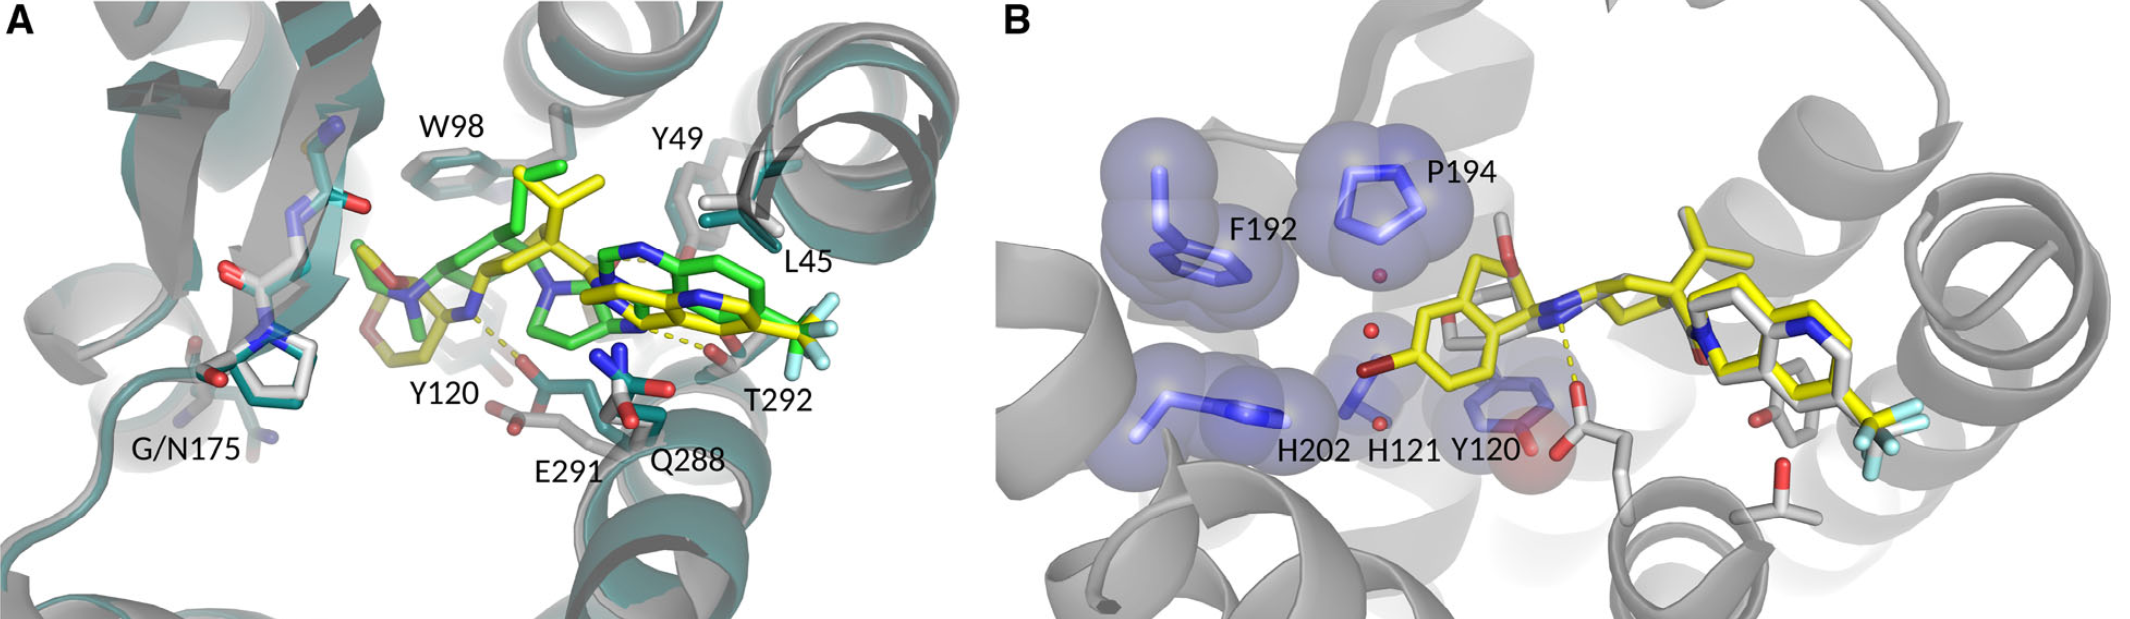 Fig. 3 from (3): A) Orthosteric site superposition of 5T1A (white) and 6GPX (blue) shows that the binding sites are structurally and conformationally highly conserved. The chemically distinct ligands BMS-681 (green) and MK-0812 (yellow) occupy overlapping sites in the receptor and form unique contacts within the binding pocket. The main difference consists in the electrostatic interaction of the E2917.39 side chain with MK- 0812. (B) Predicted binding pose of compound 15a (yellow) superimposed with MK-0812 (white). Indane contacting residues are shown as van der Waals spheres (blue); three water molecules that are potentially displaced are shown as red spheres.